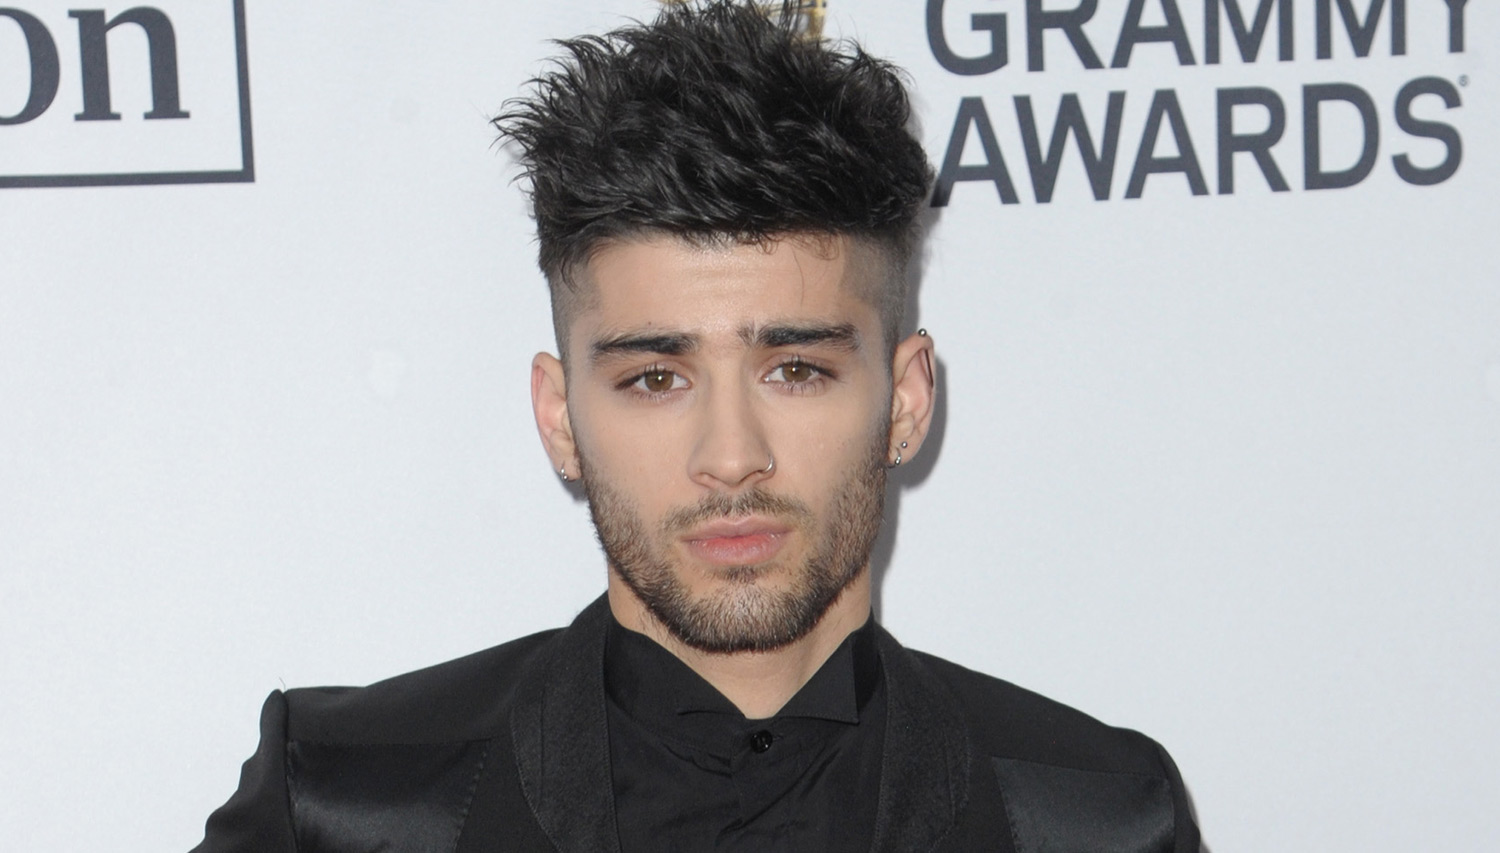 Zayn Malik is bald now, and fans are in deep, deep mourning | Mashable